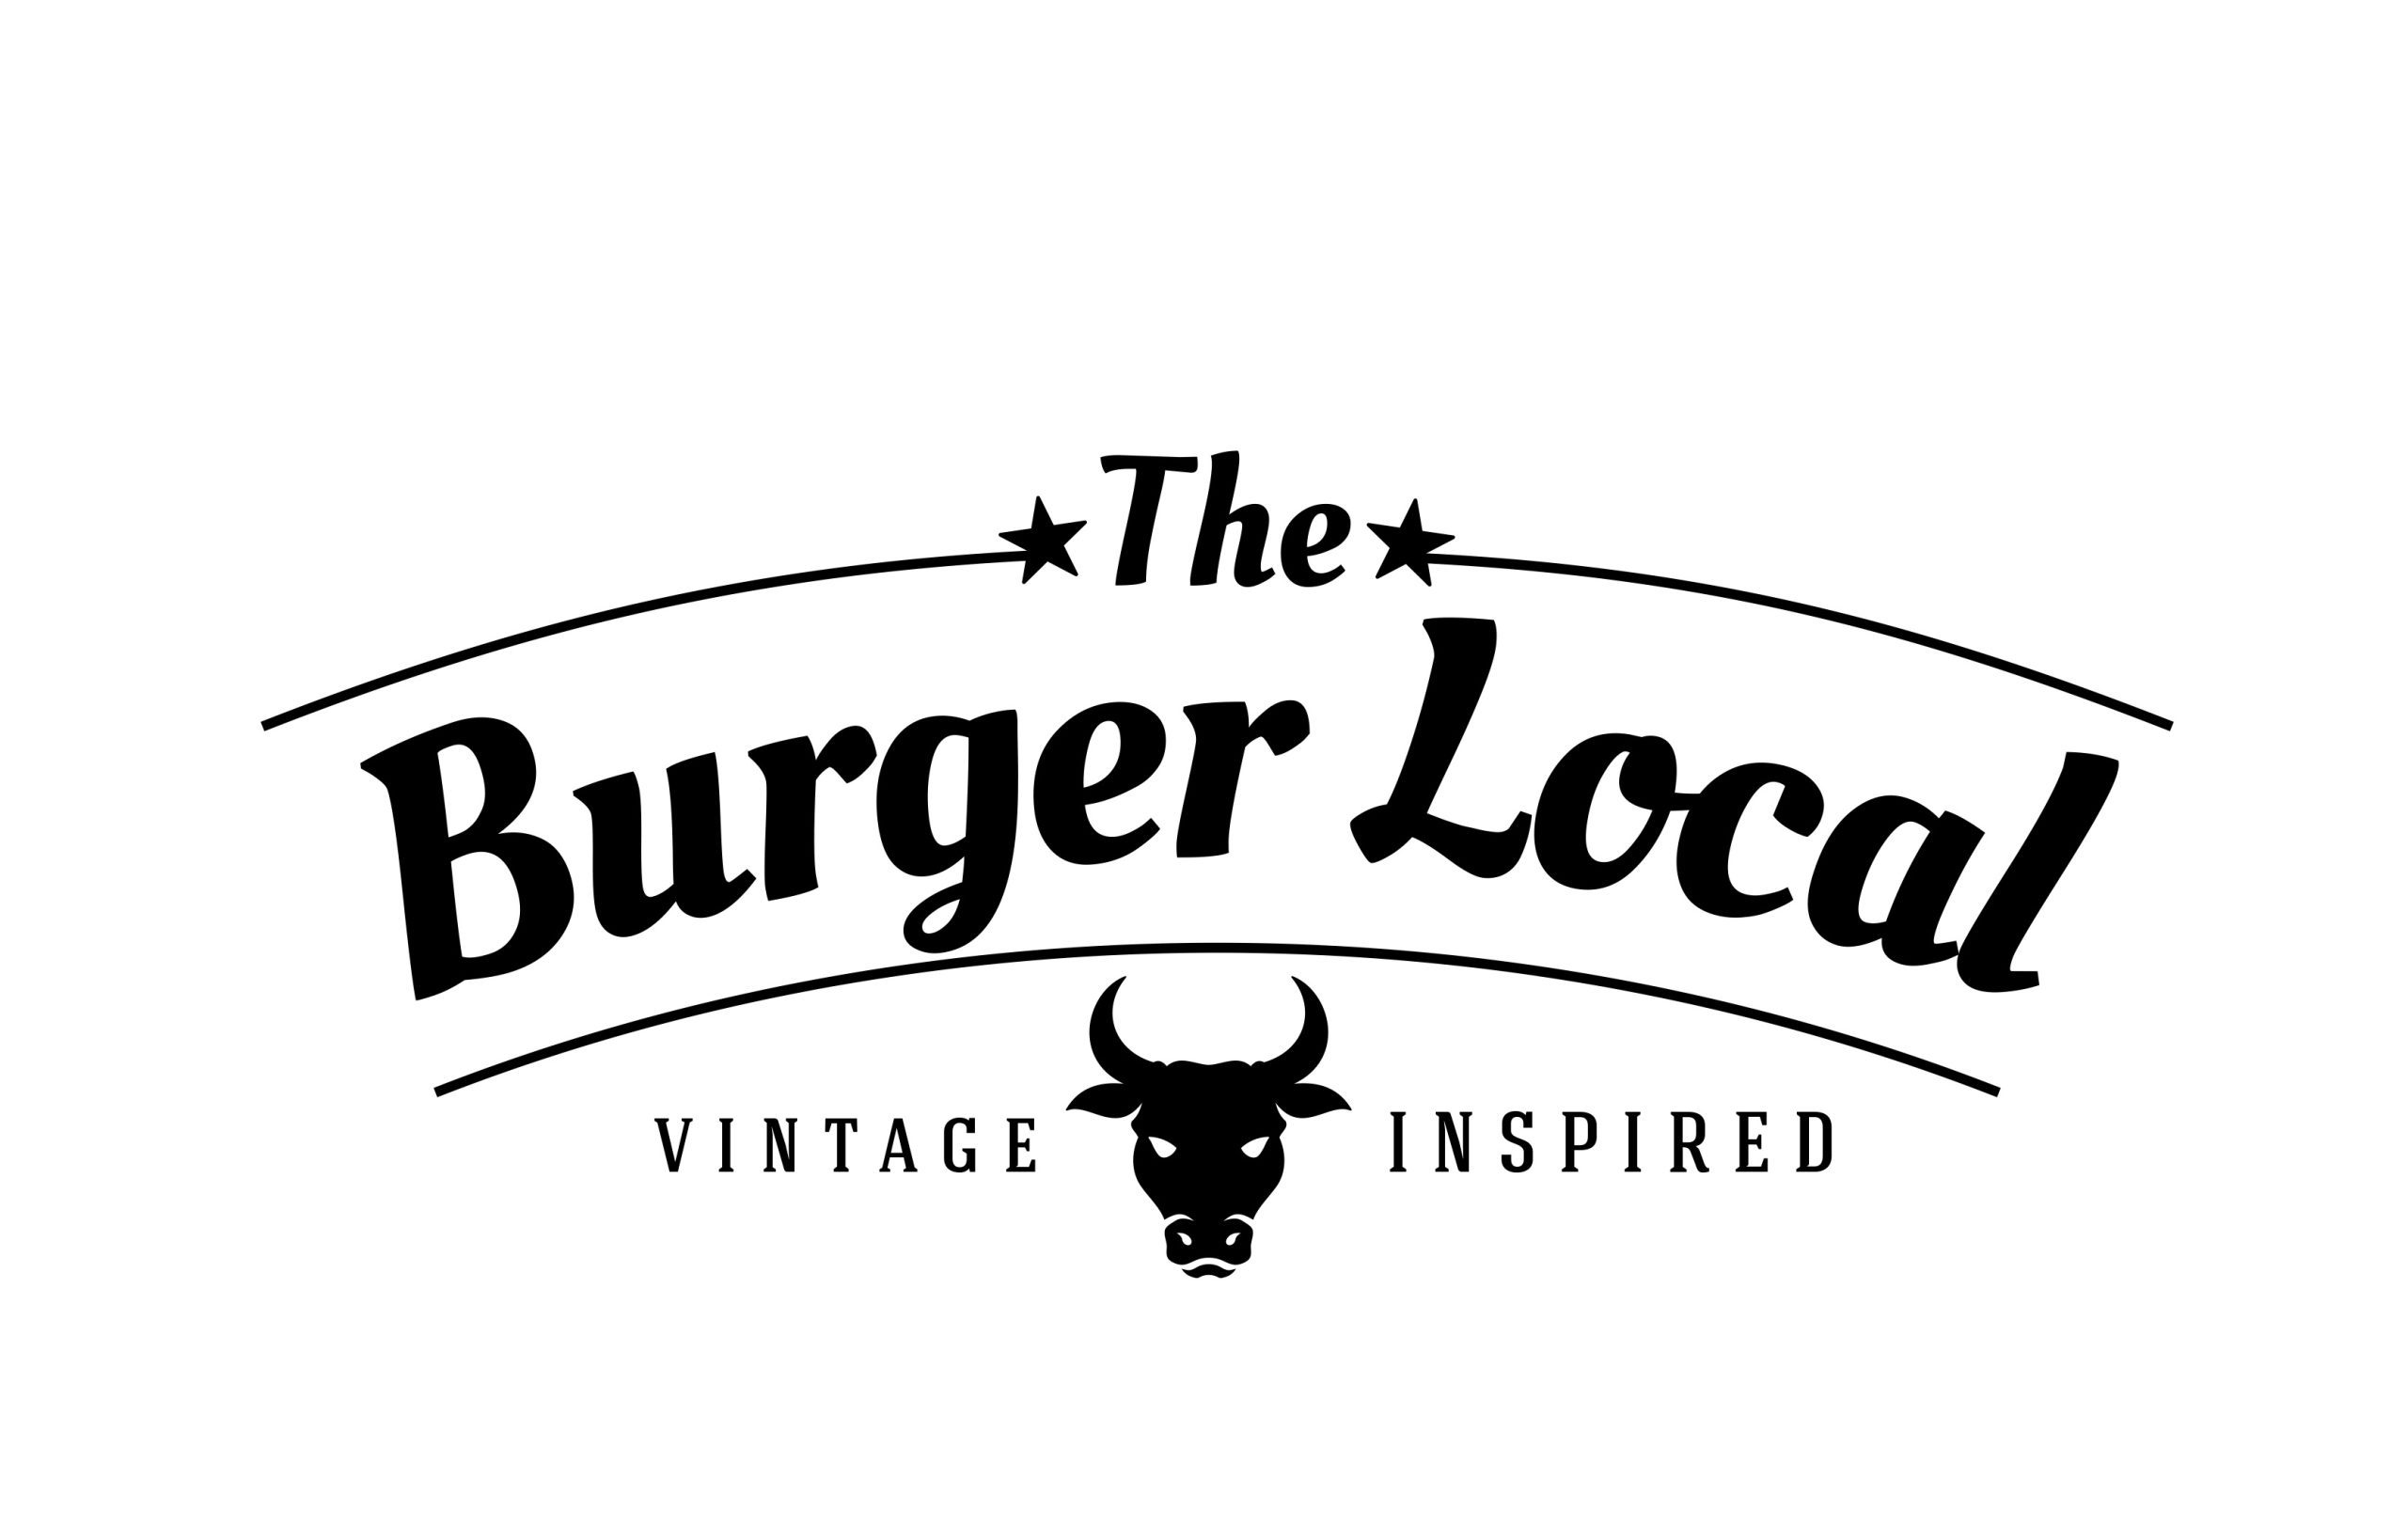 THE BURGER LOCAL